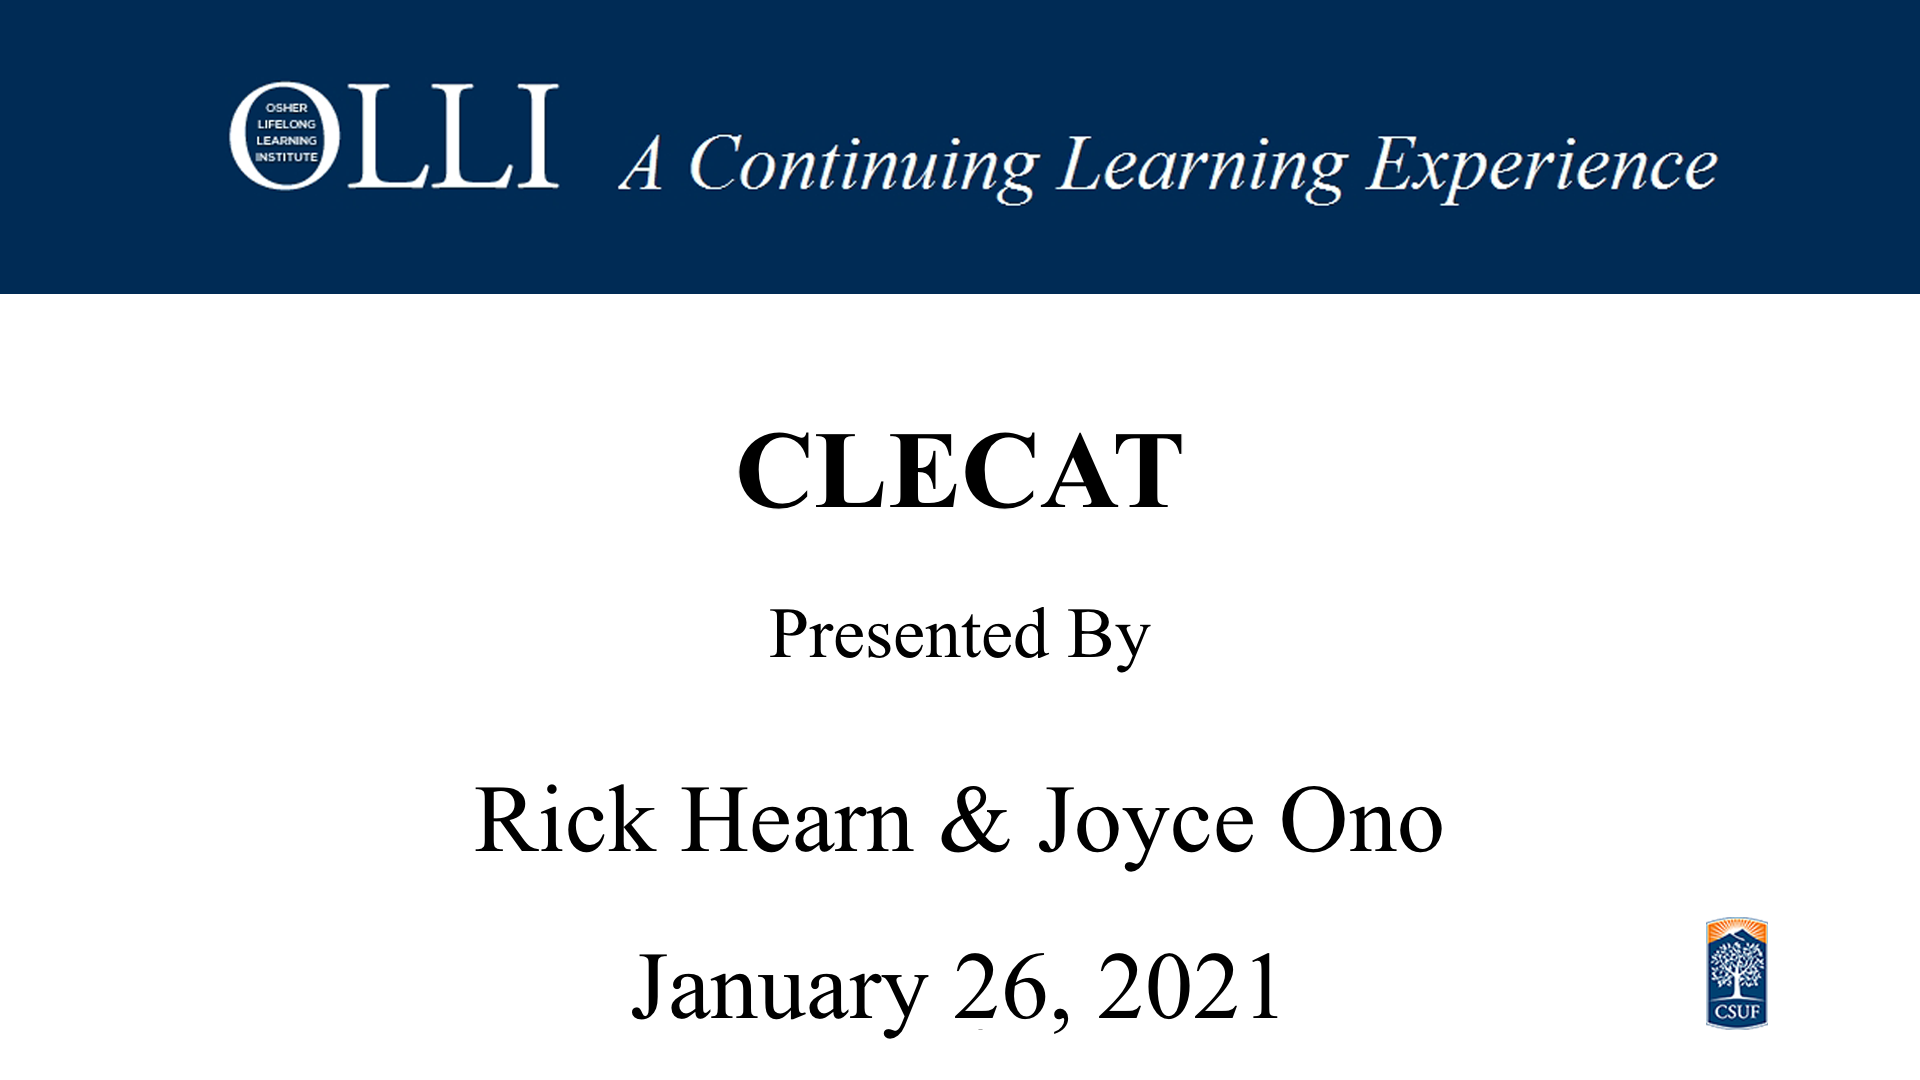 Click here to view CLECAT video